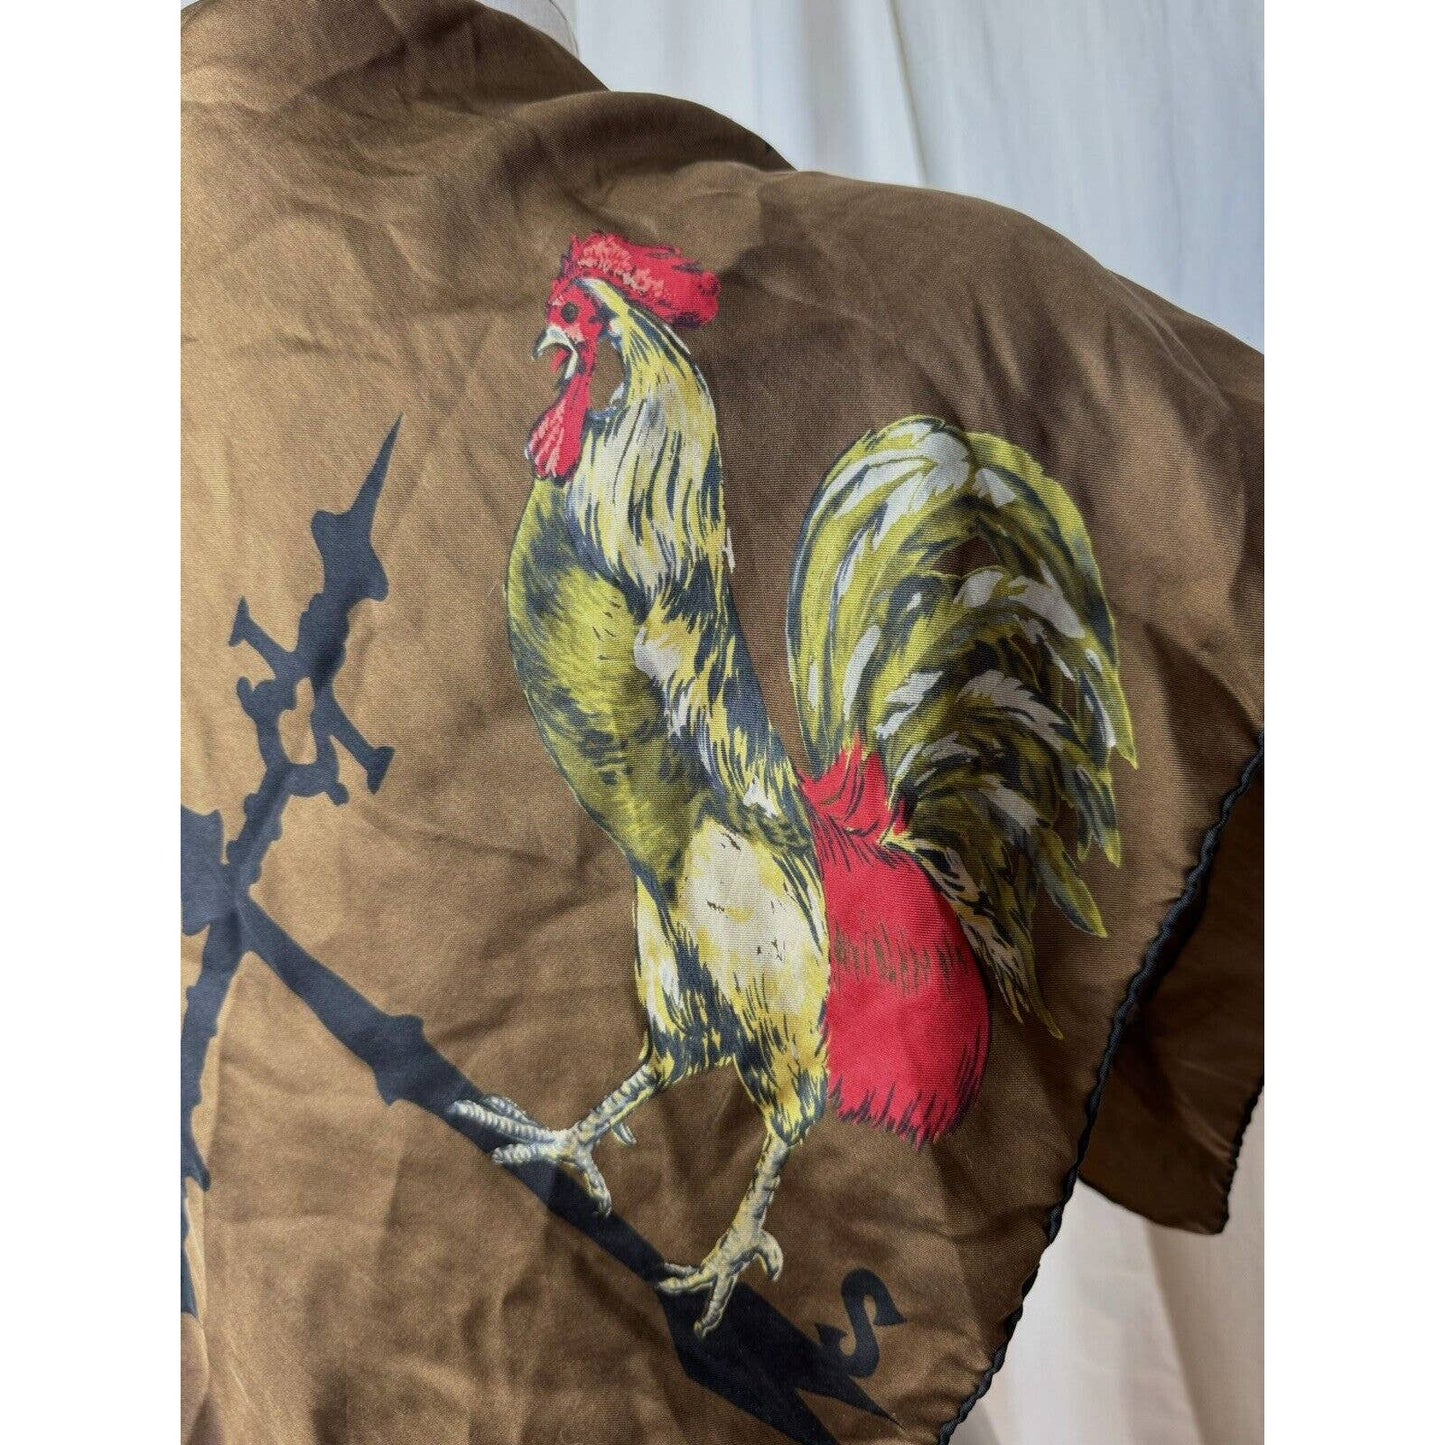 EchoEcho Vintage Weathervane 100% Silk - Rooster - Made In Italy Square Scarf 30x30 - Black Dog Vintage